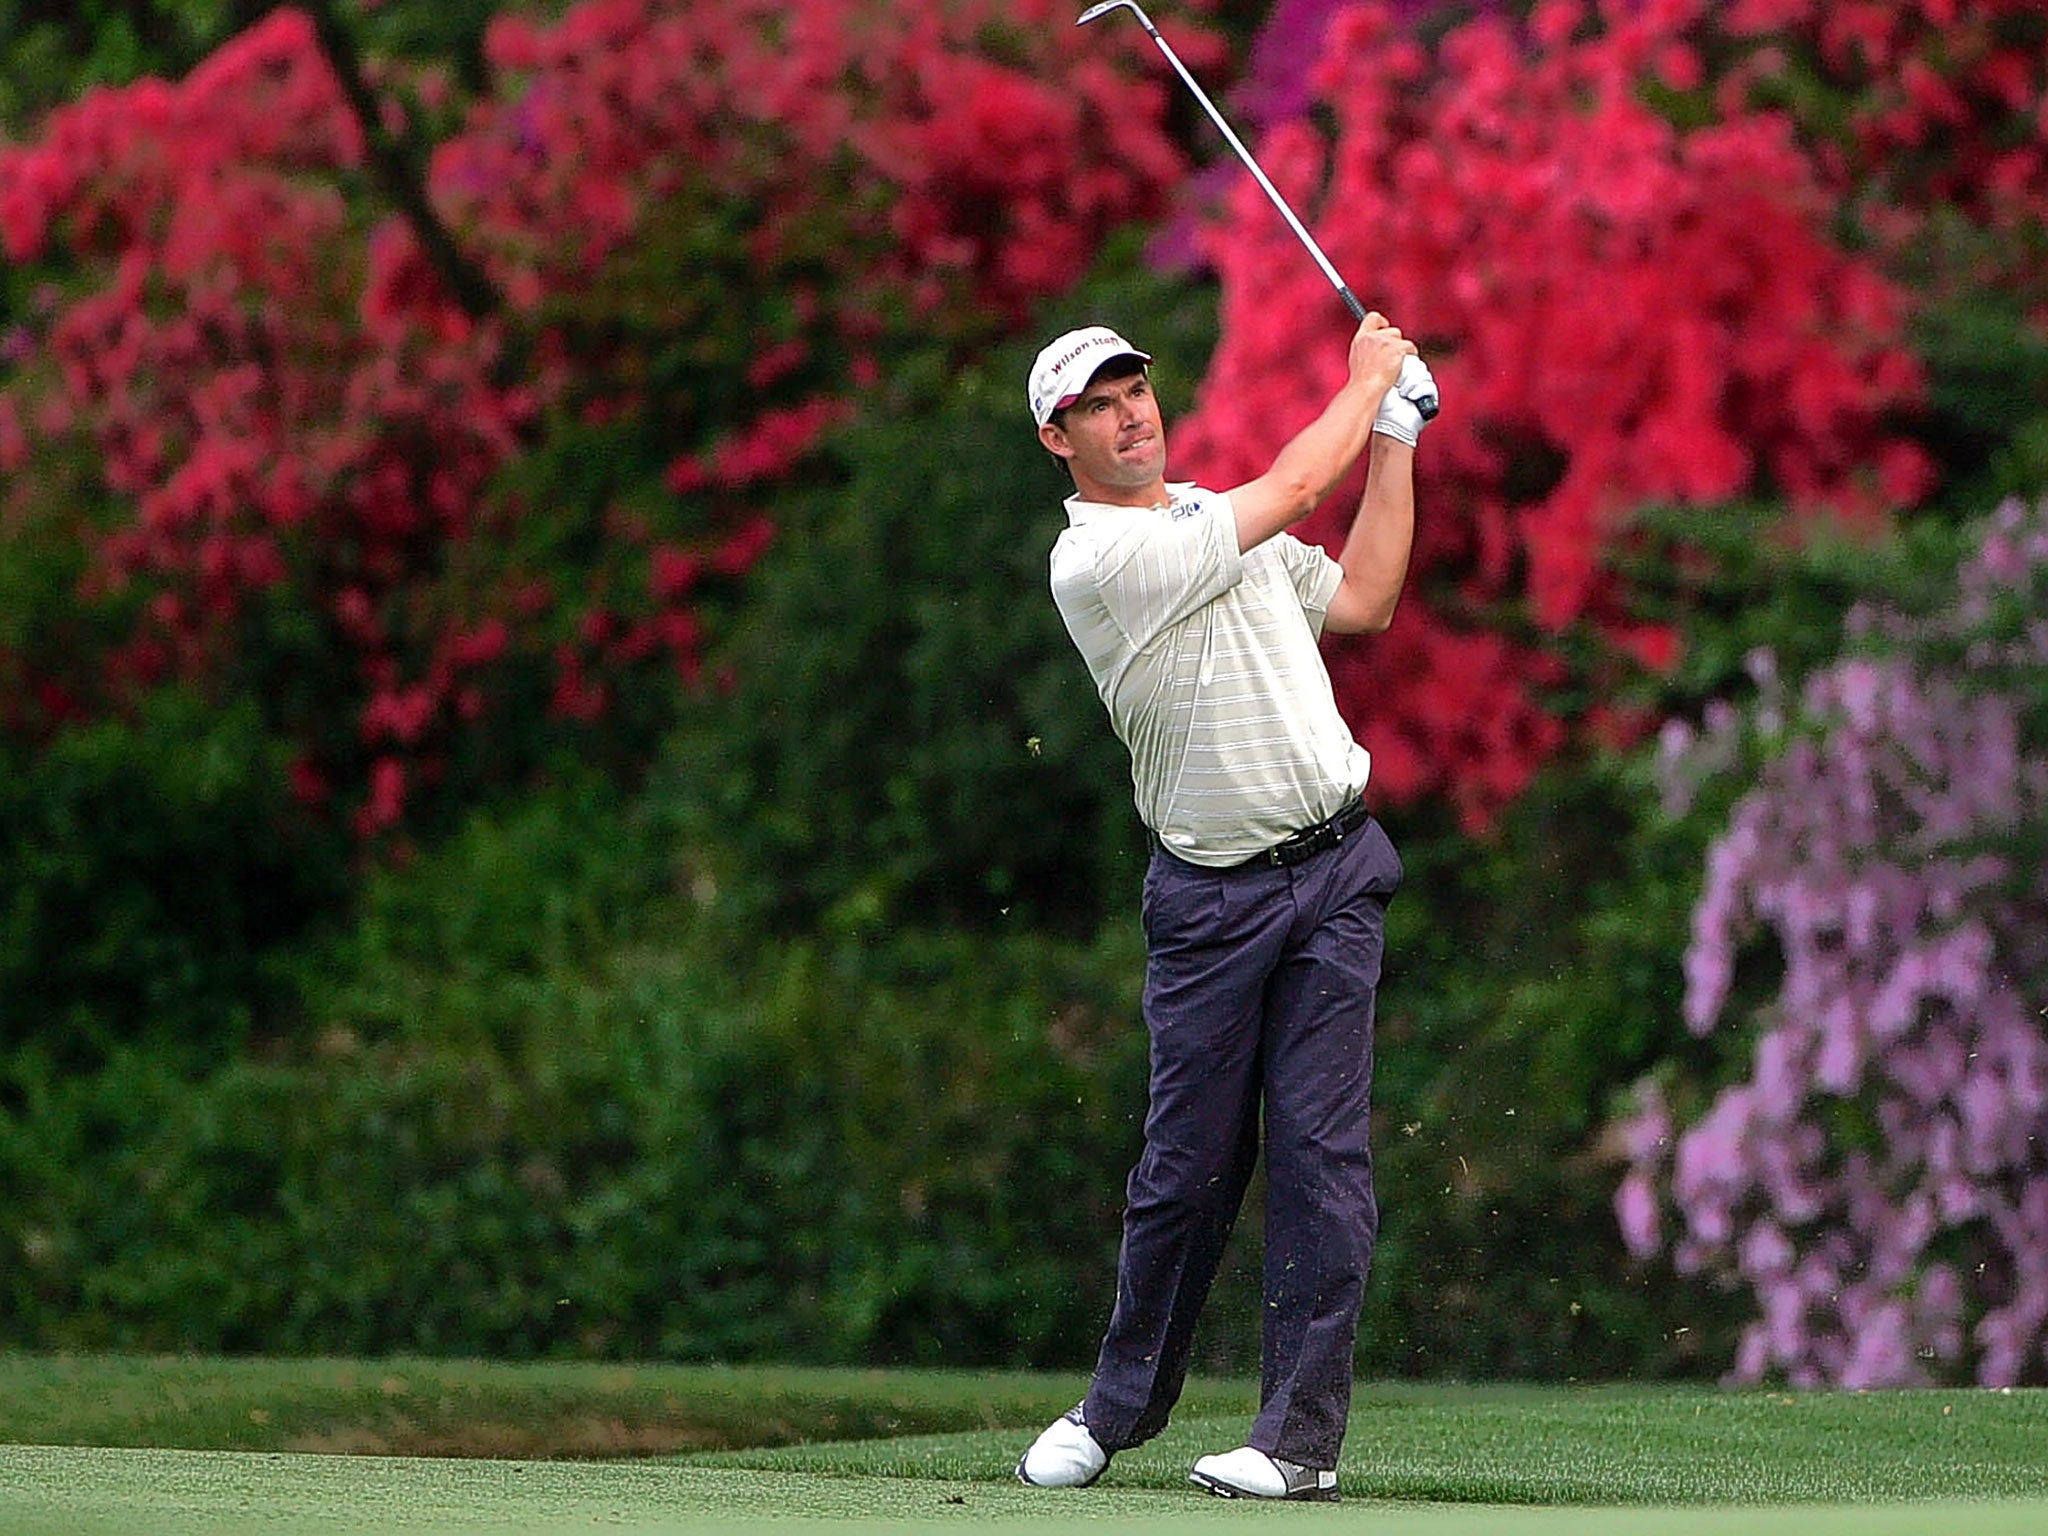 Padraig Harrington plays his tee shot on the 13th hole during the first day of the Masters in 2002